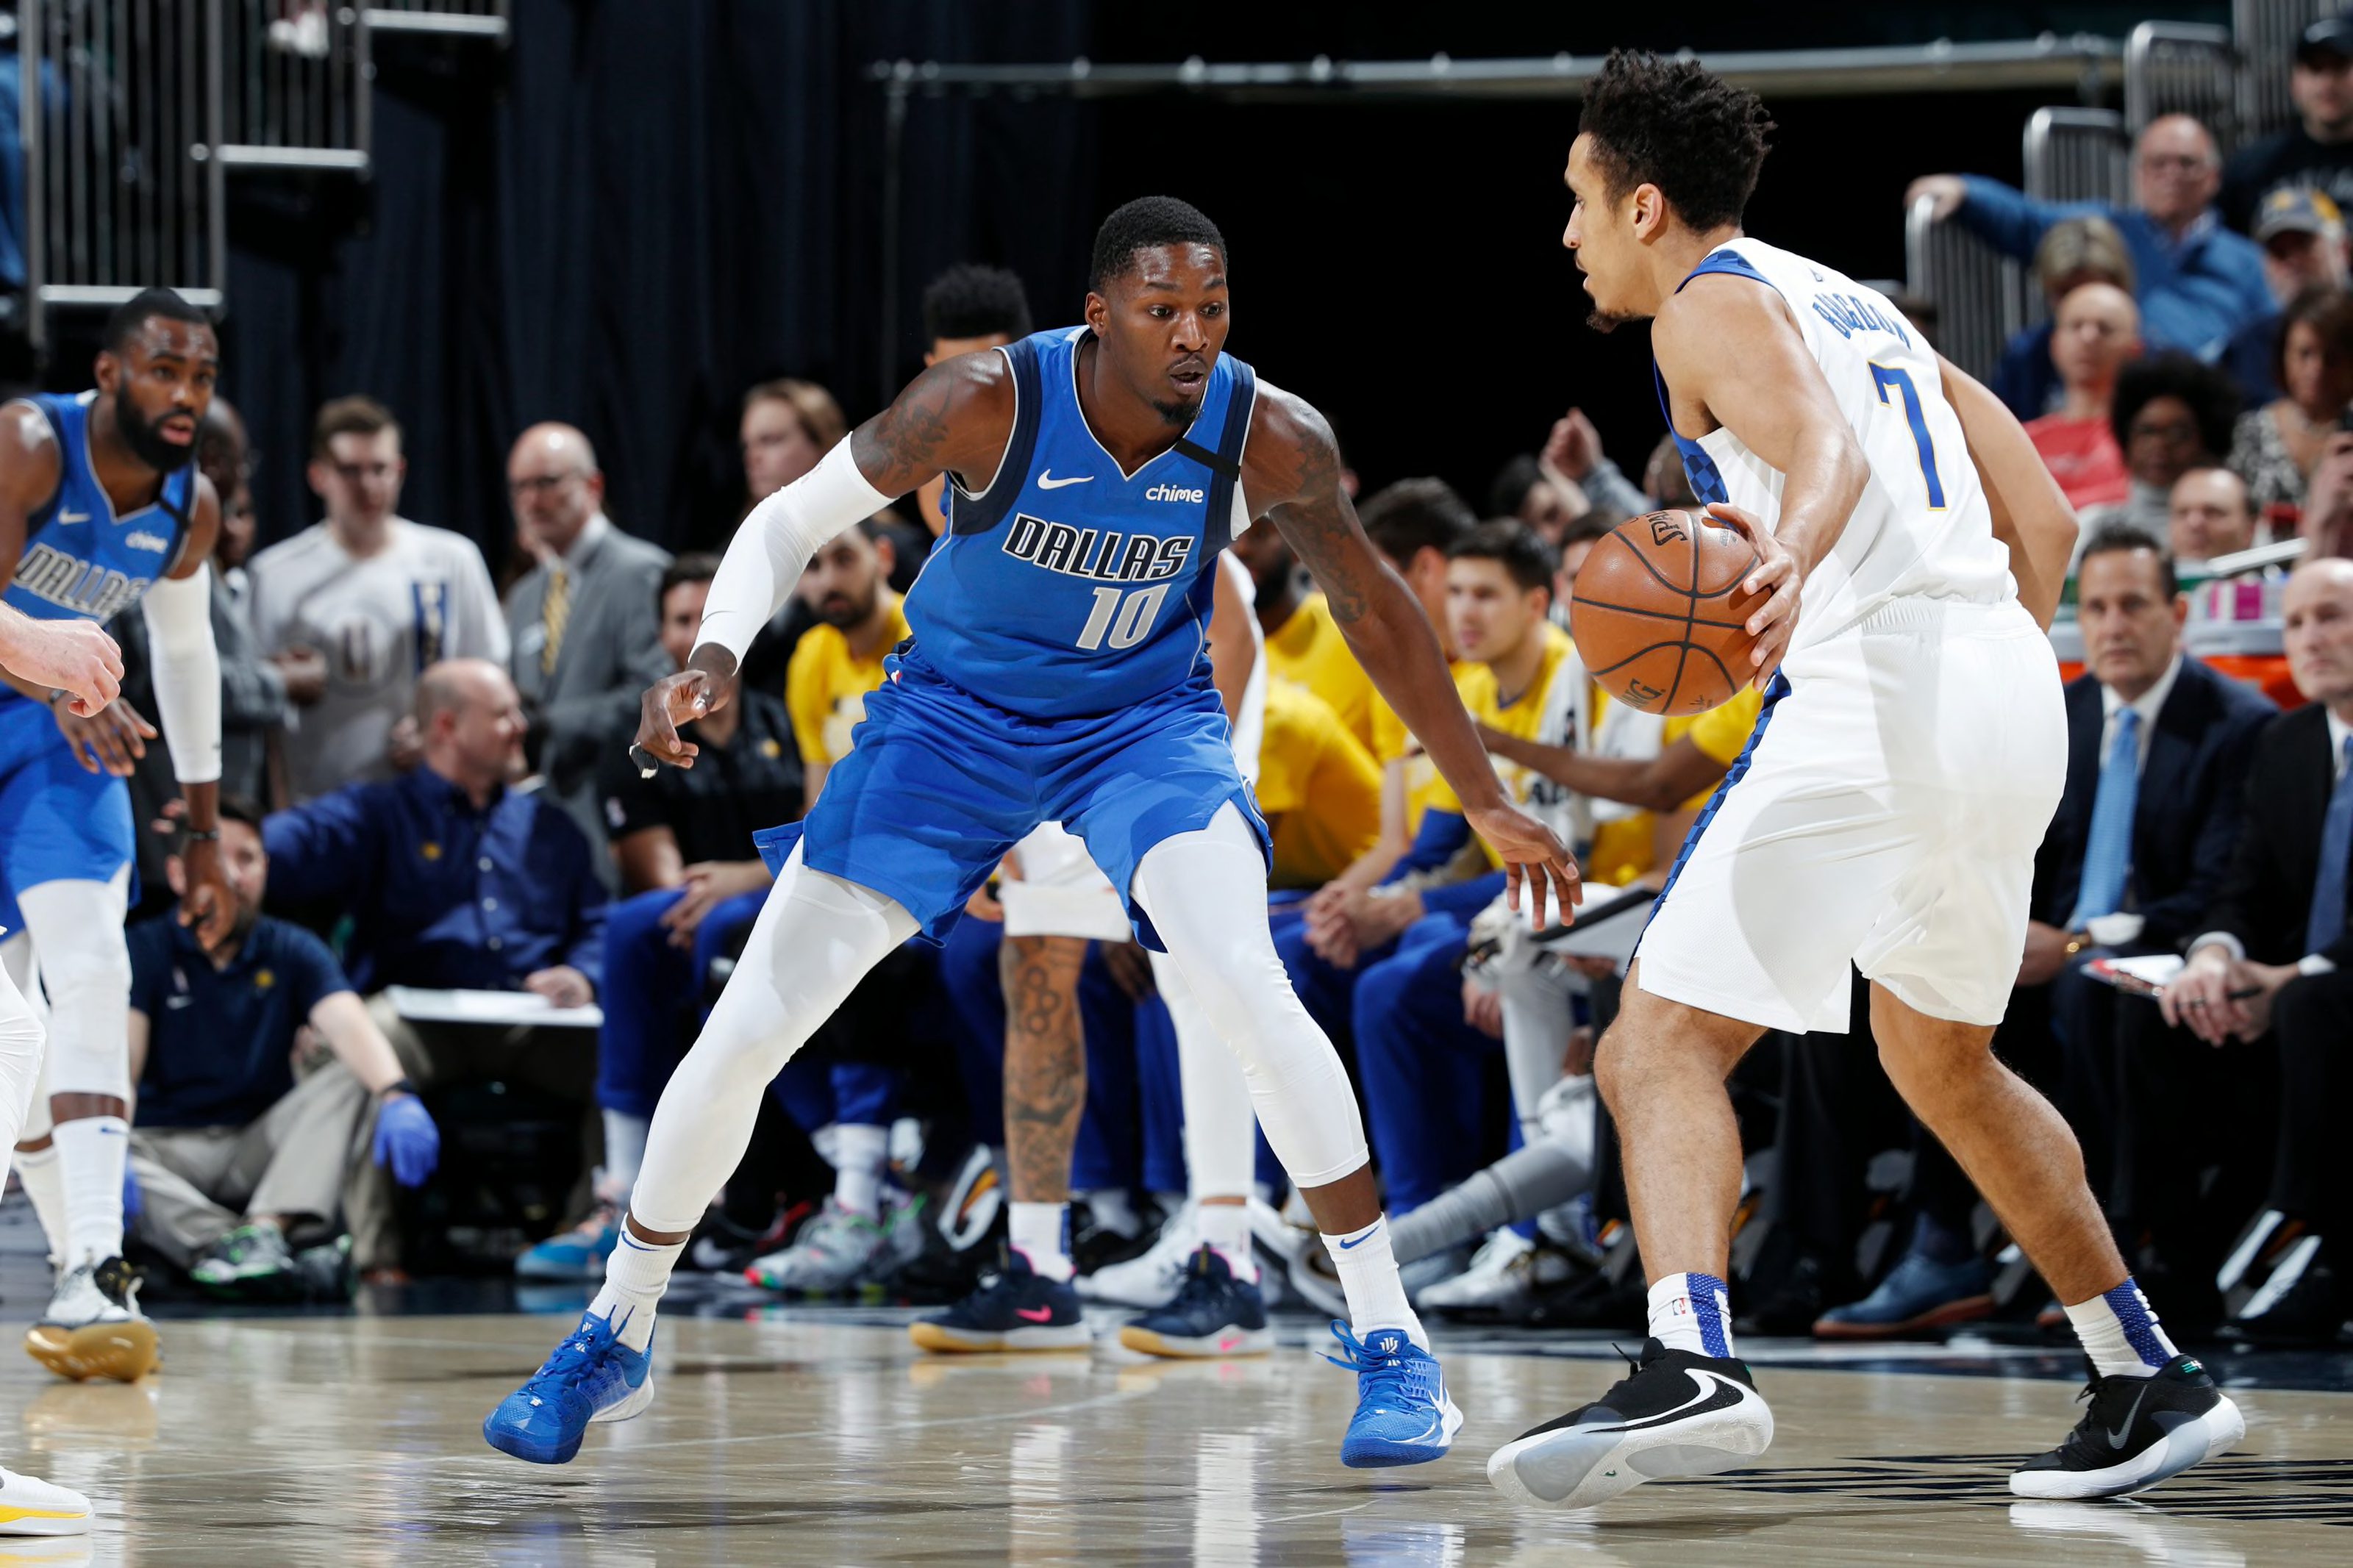 Mavericks: Dorian Finney-Smith is one of the most underrated players